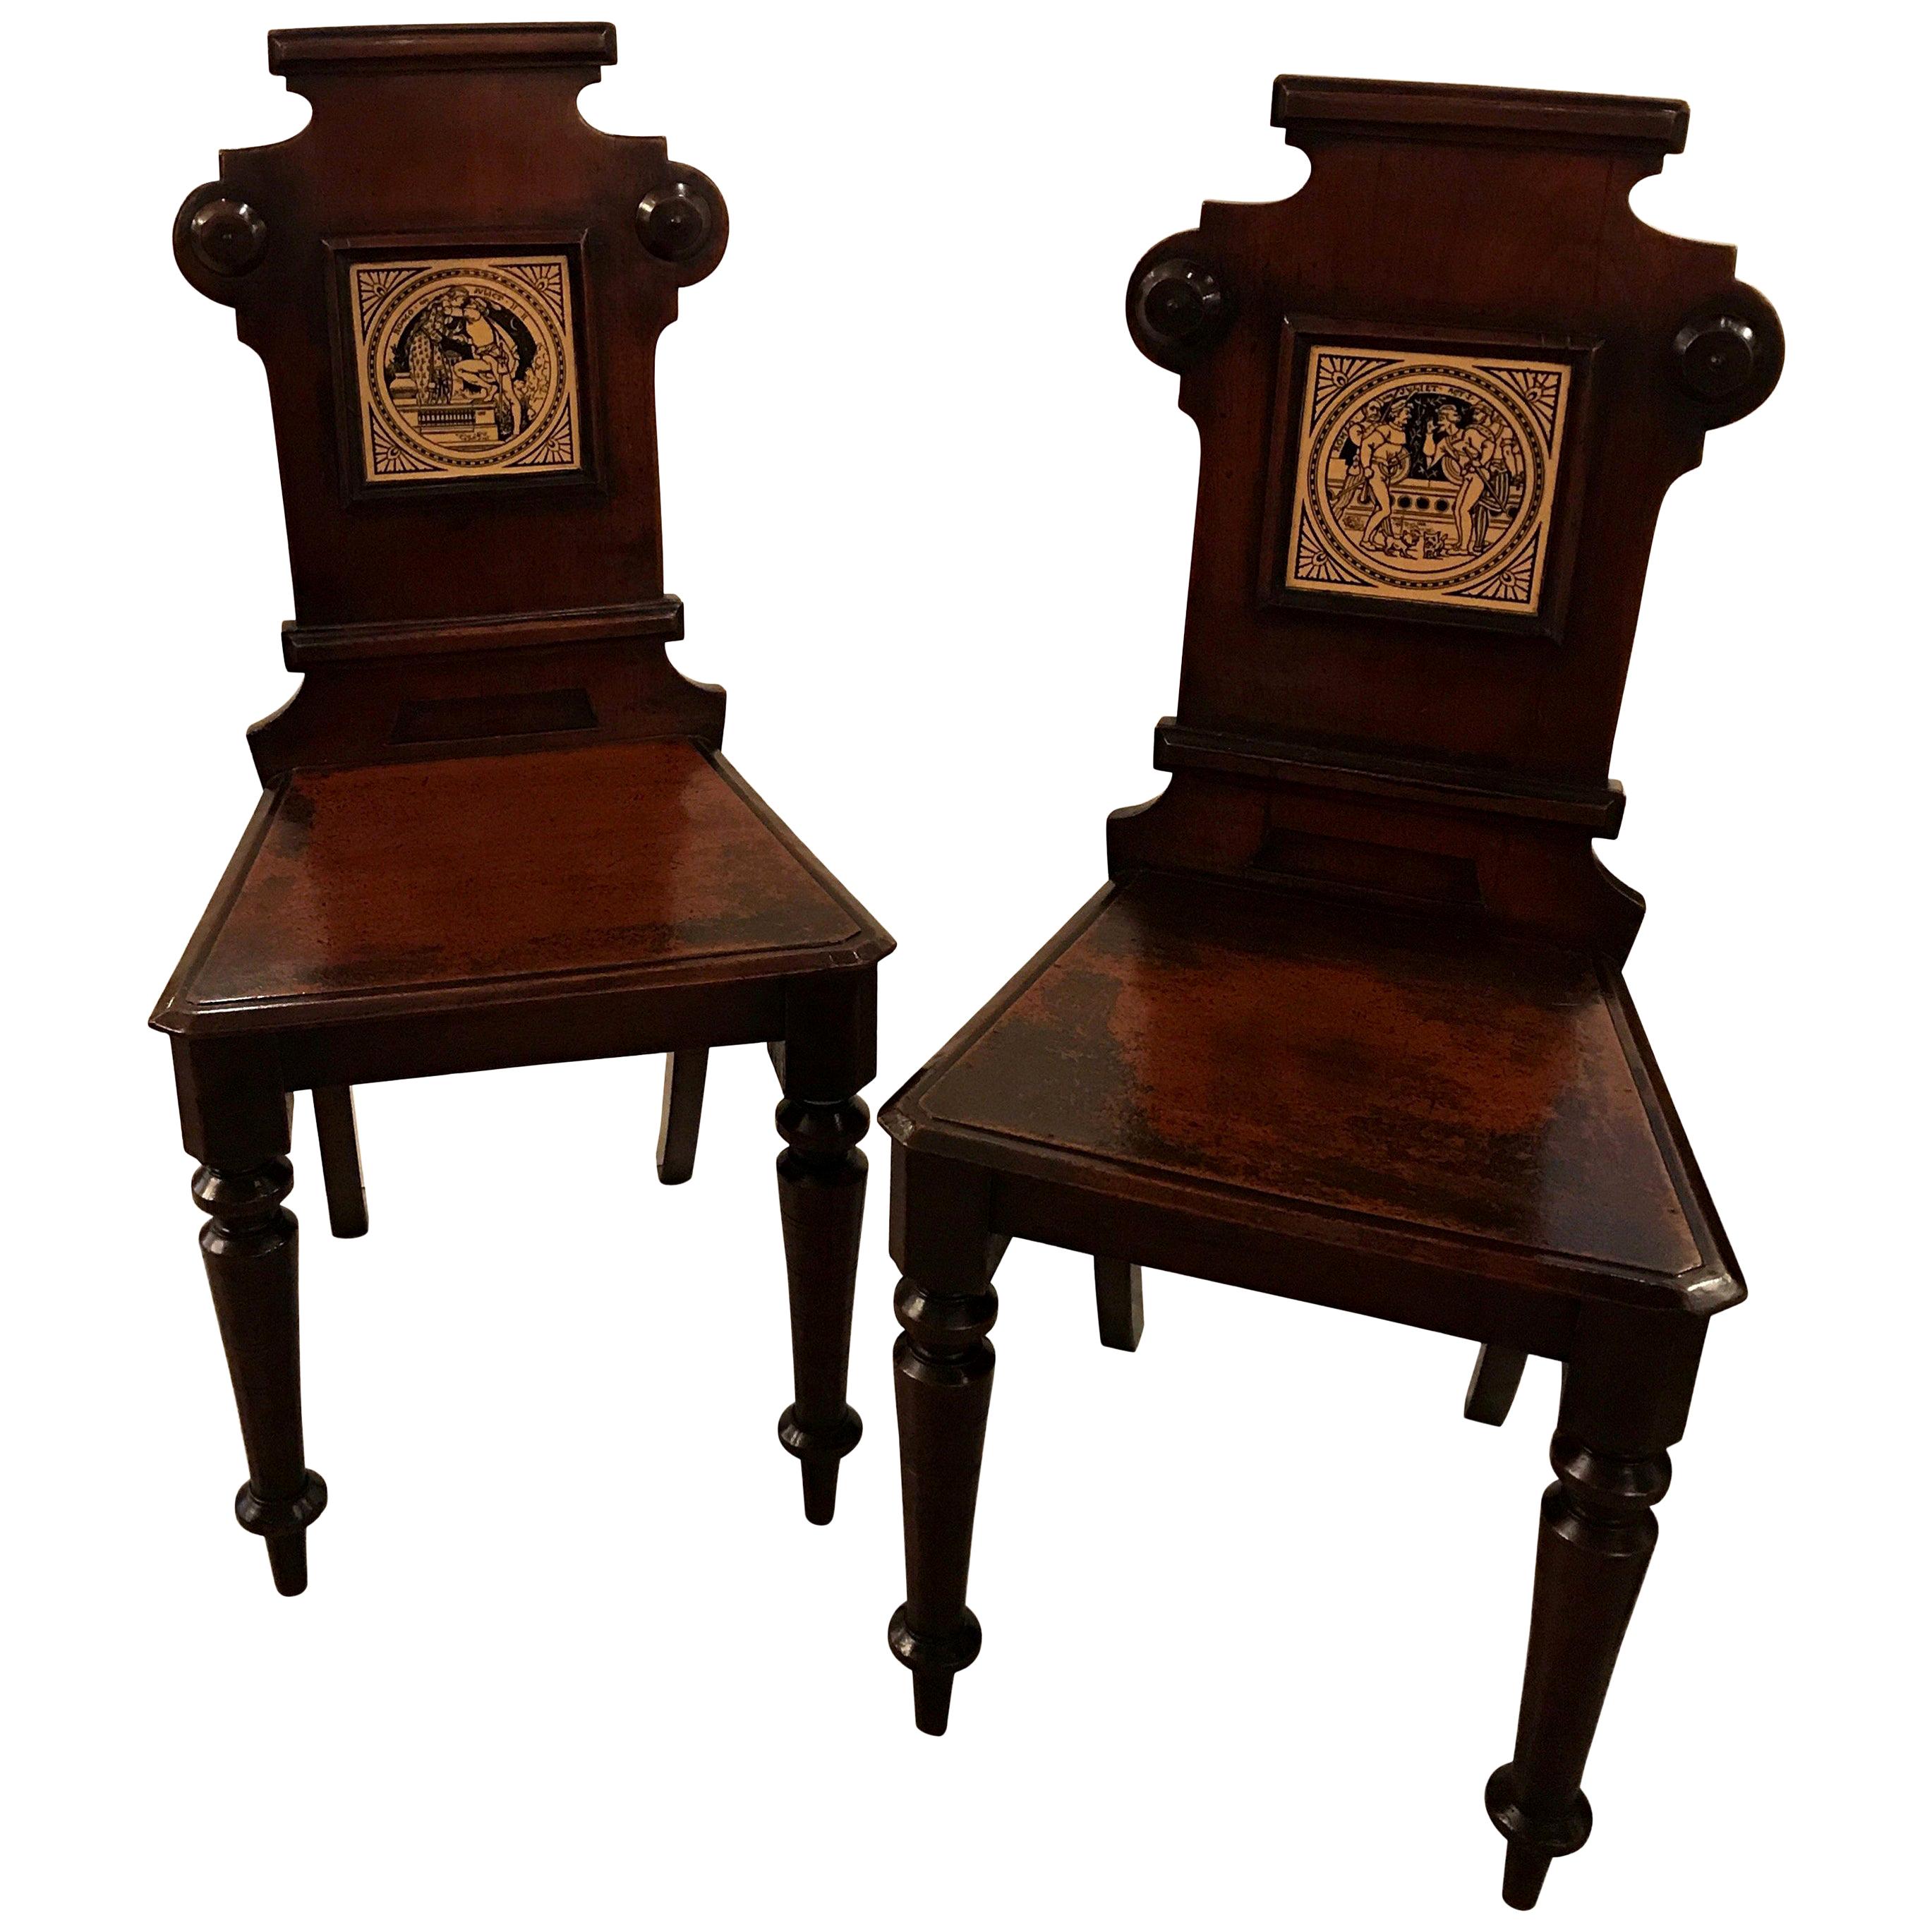 Pair of 19th Century English Hall Chairs with Minton Tiles